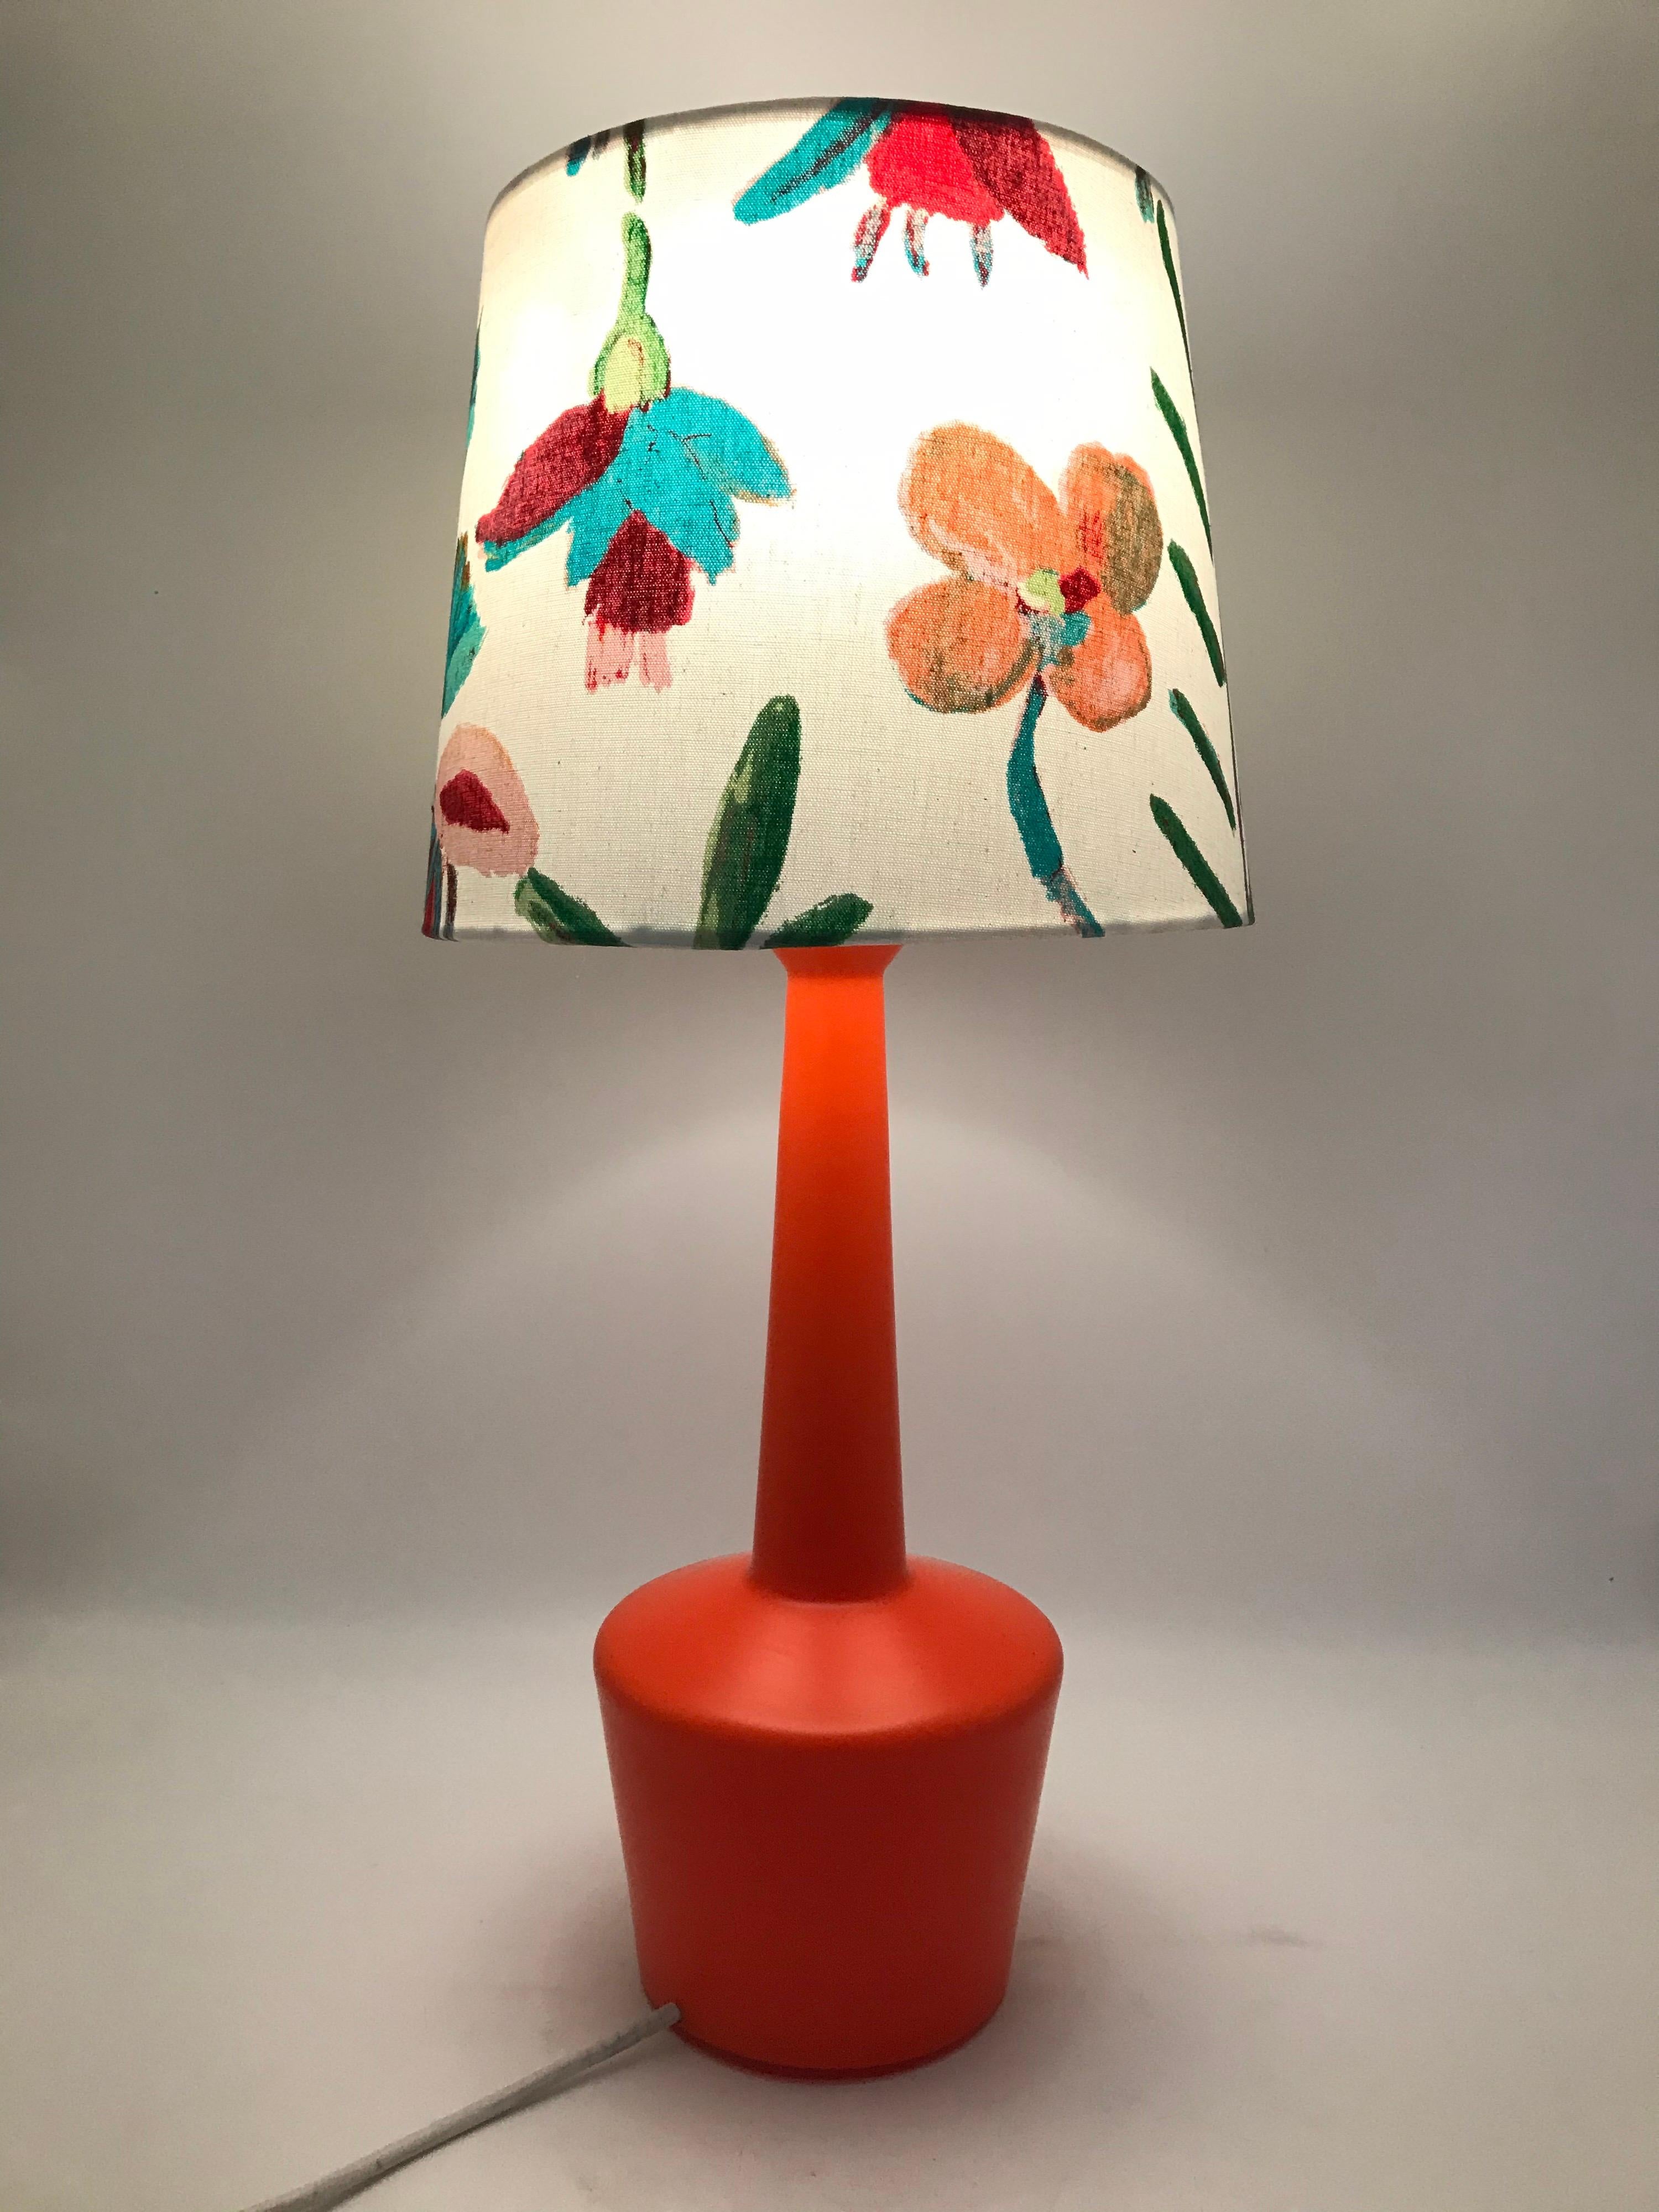 Vintage Danish table lamp by Kastrup Glass Works from the 1960s and with a limited edition handmade shade by Artbymaj.
Each shade is unique and handmade.
The glass lamp with its stunning orange color together with the floral design on the white